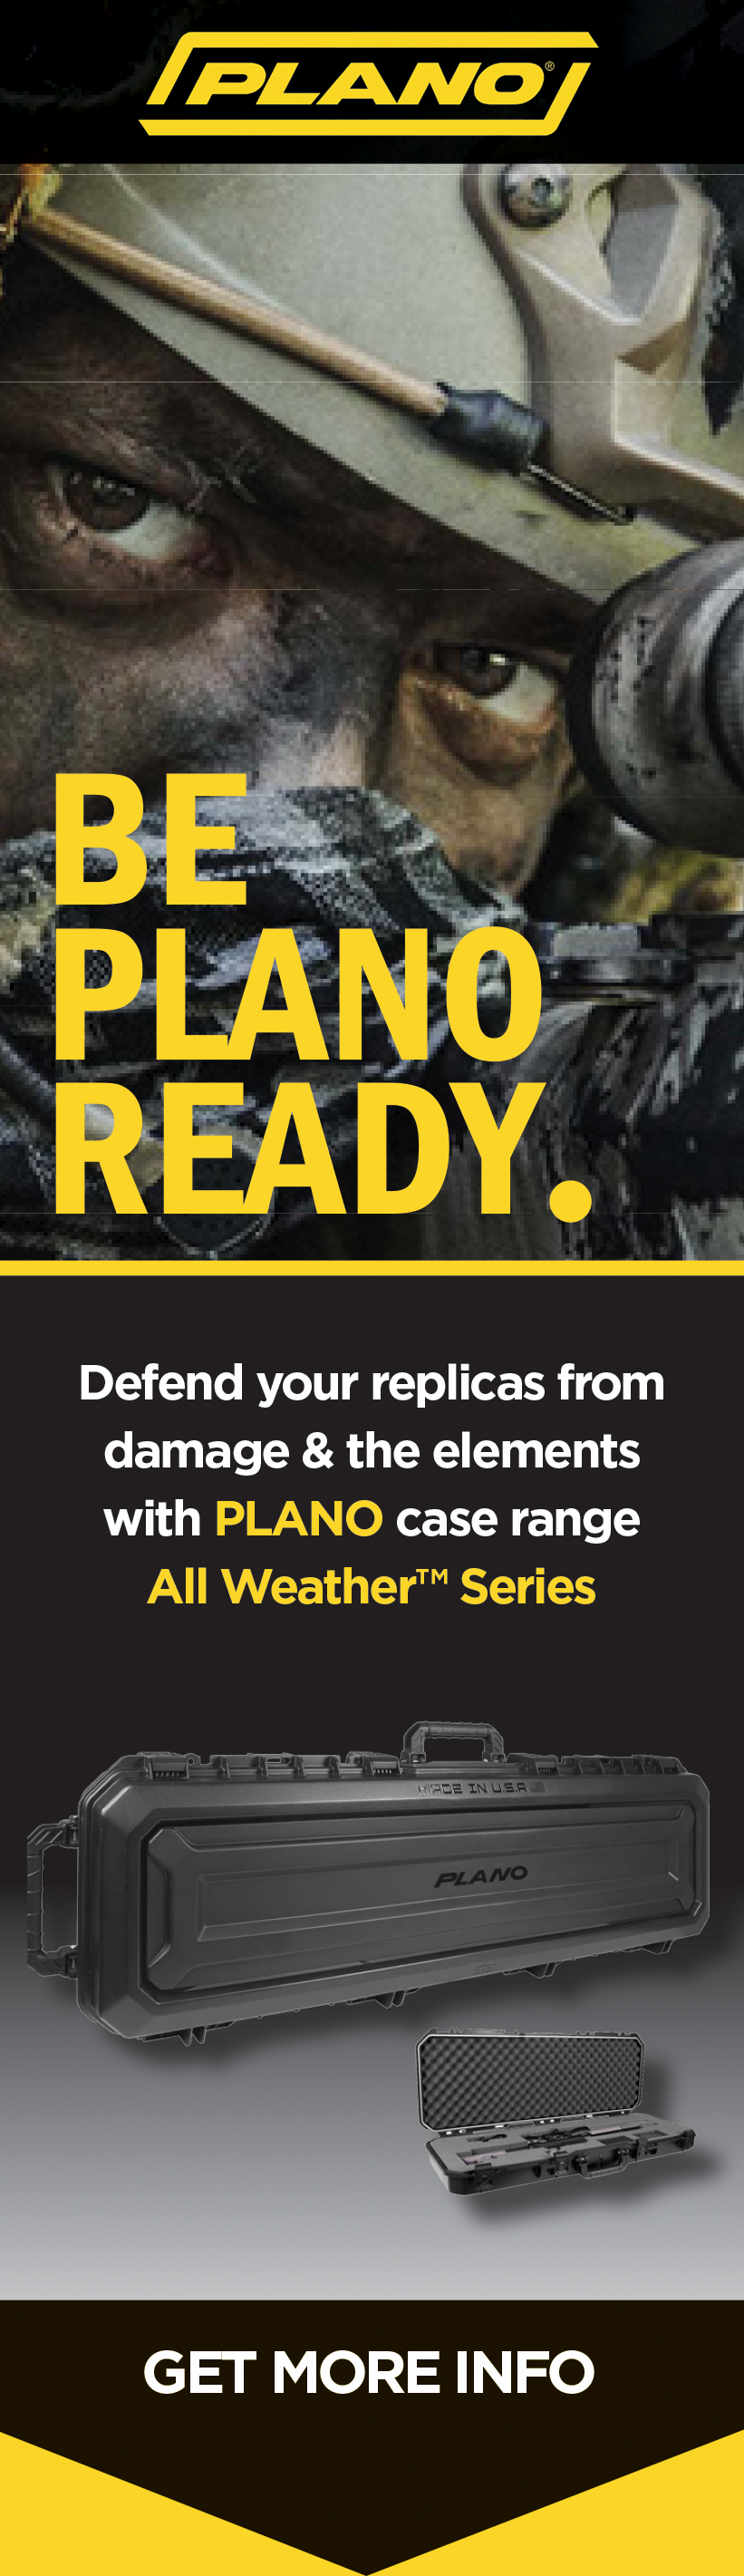 ALL WEATHER™ SERIES: ALL WEATHER™ LONG GUN CASES